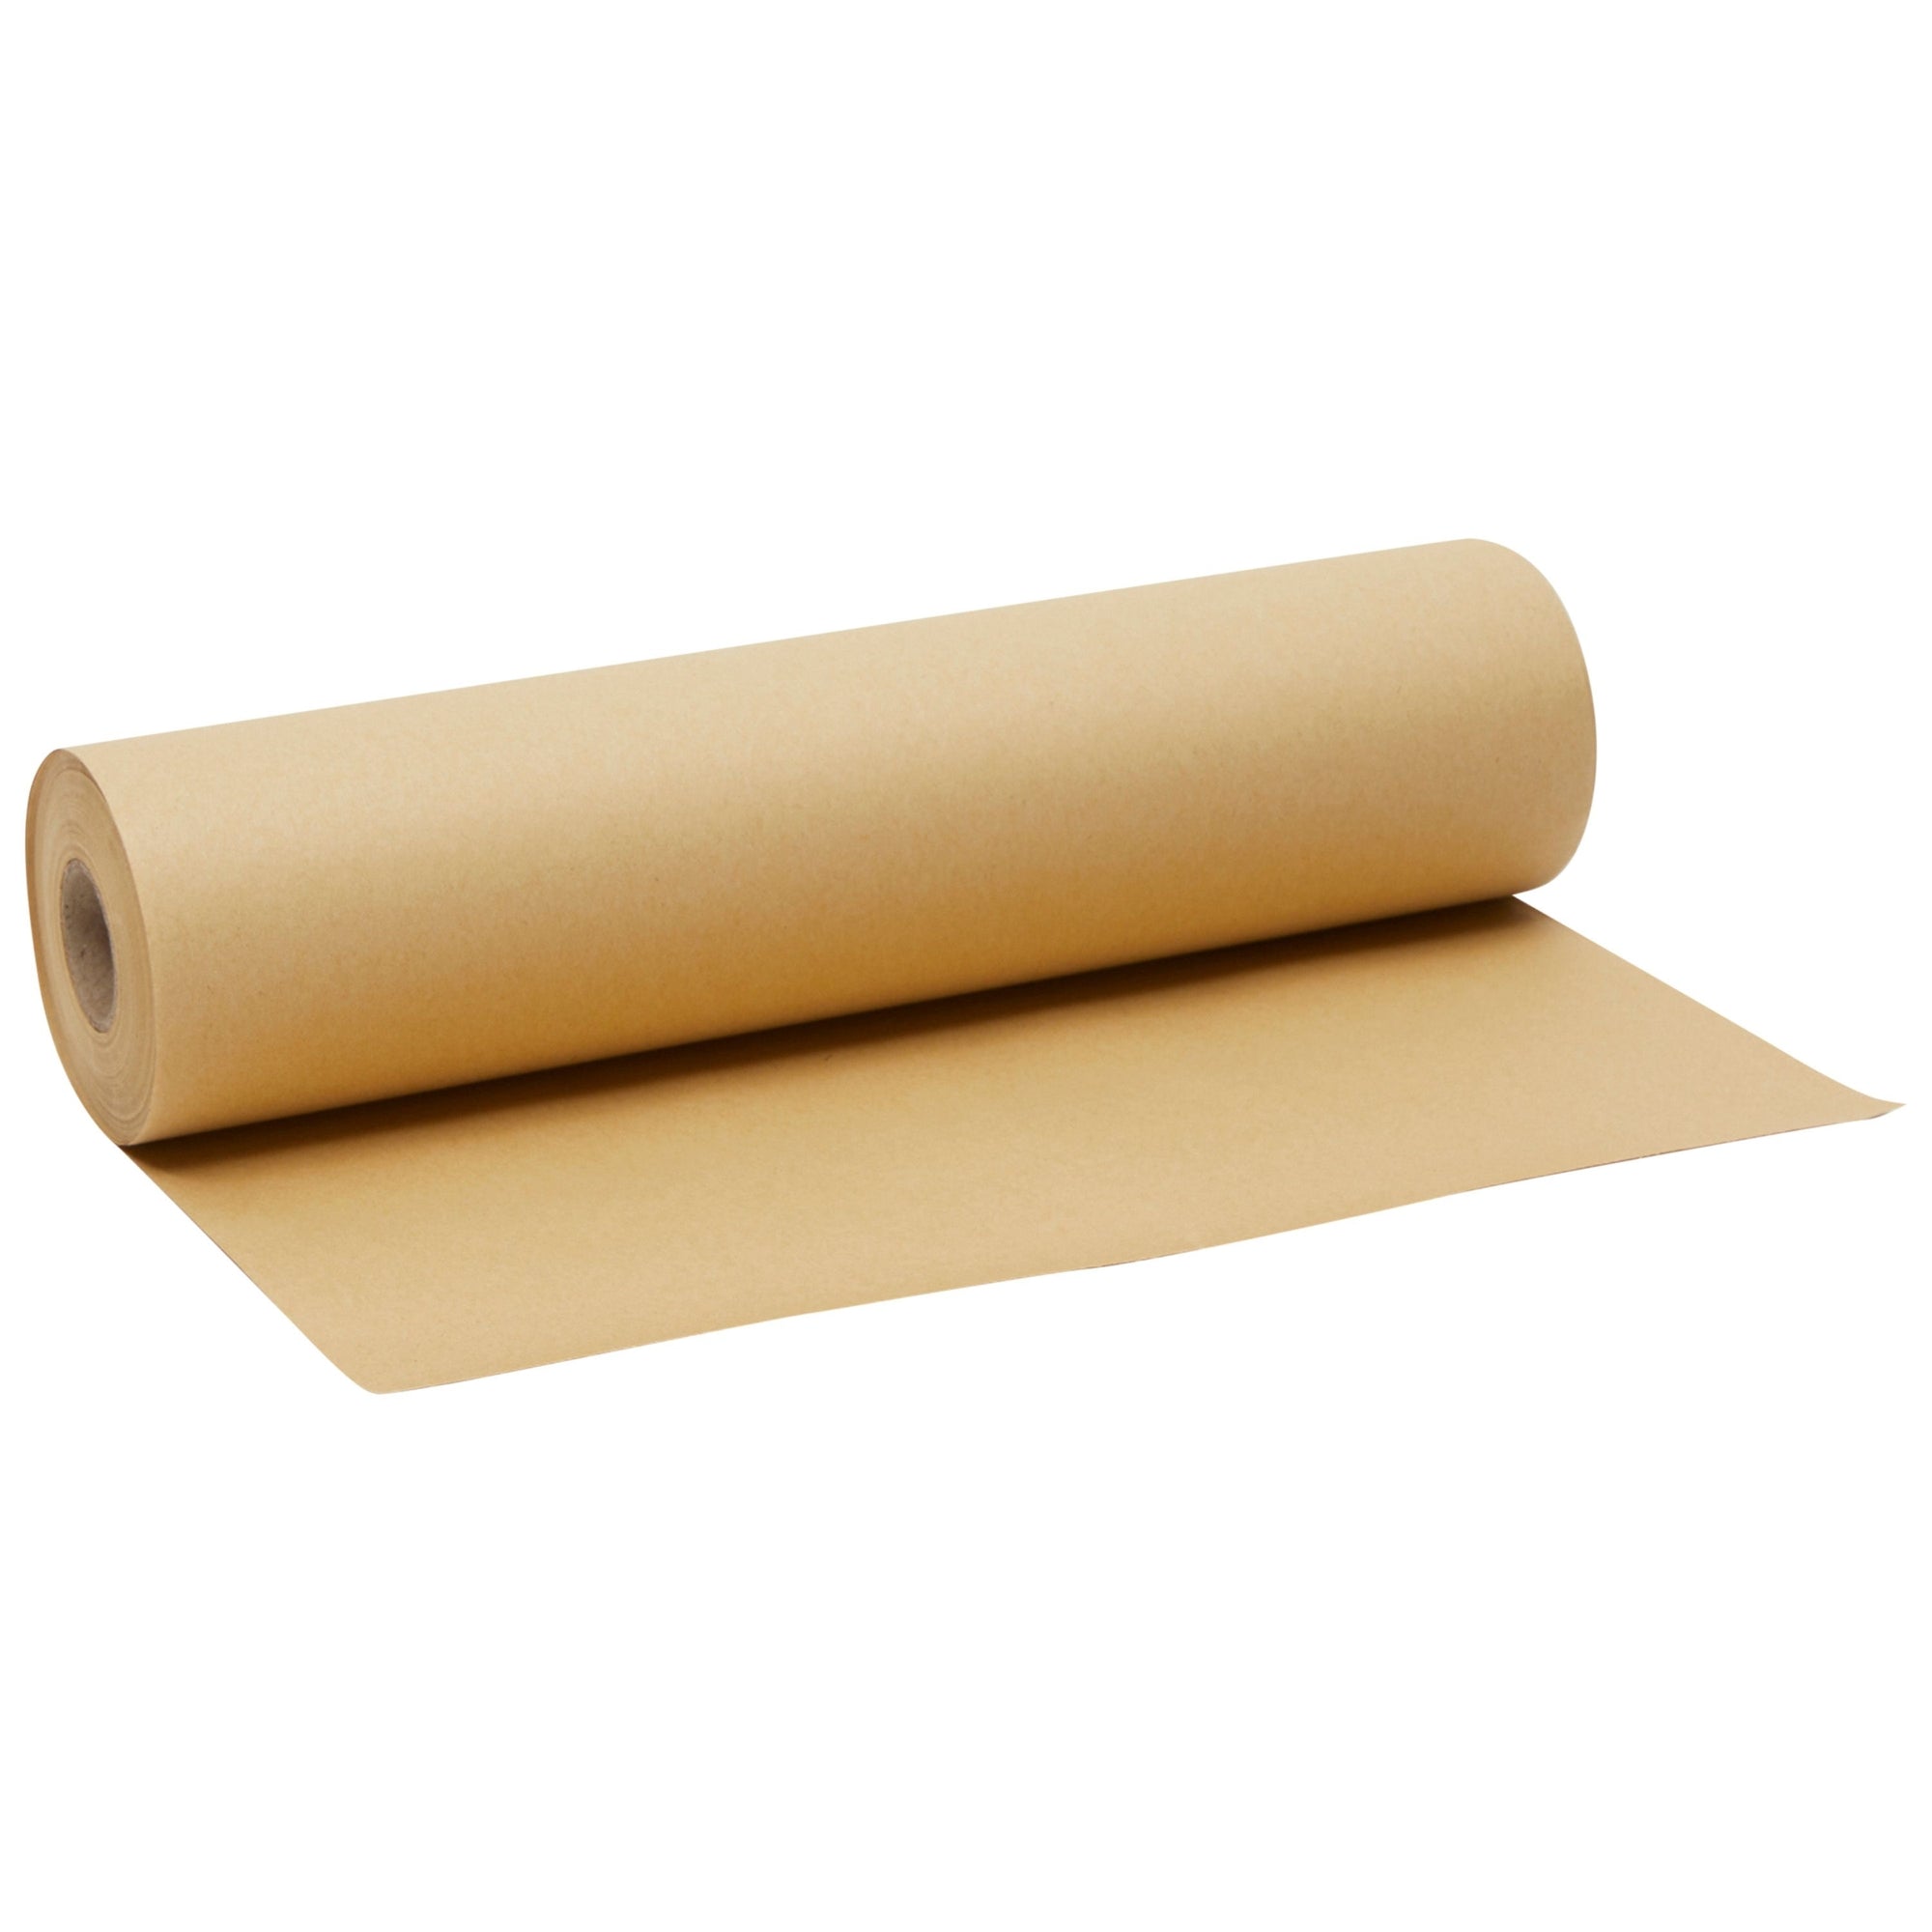 Juvale Kraft Paper Roll 12 x 1200 In, Plain Brown Shipping Paper for Gift  Wrapping, Packing, DIY Crafts, Bulletin Board Easel (100 Feet)